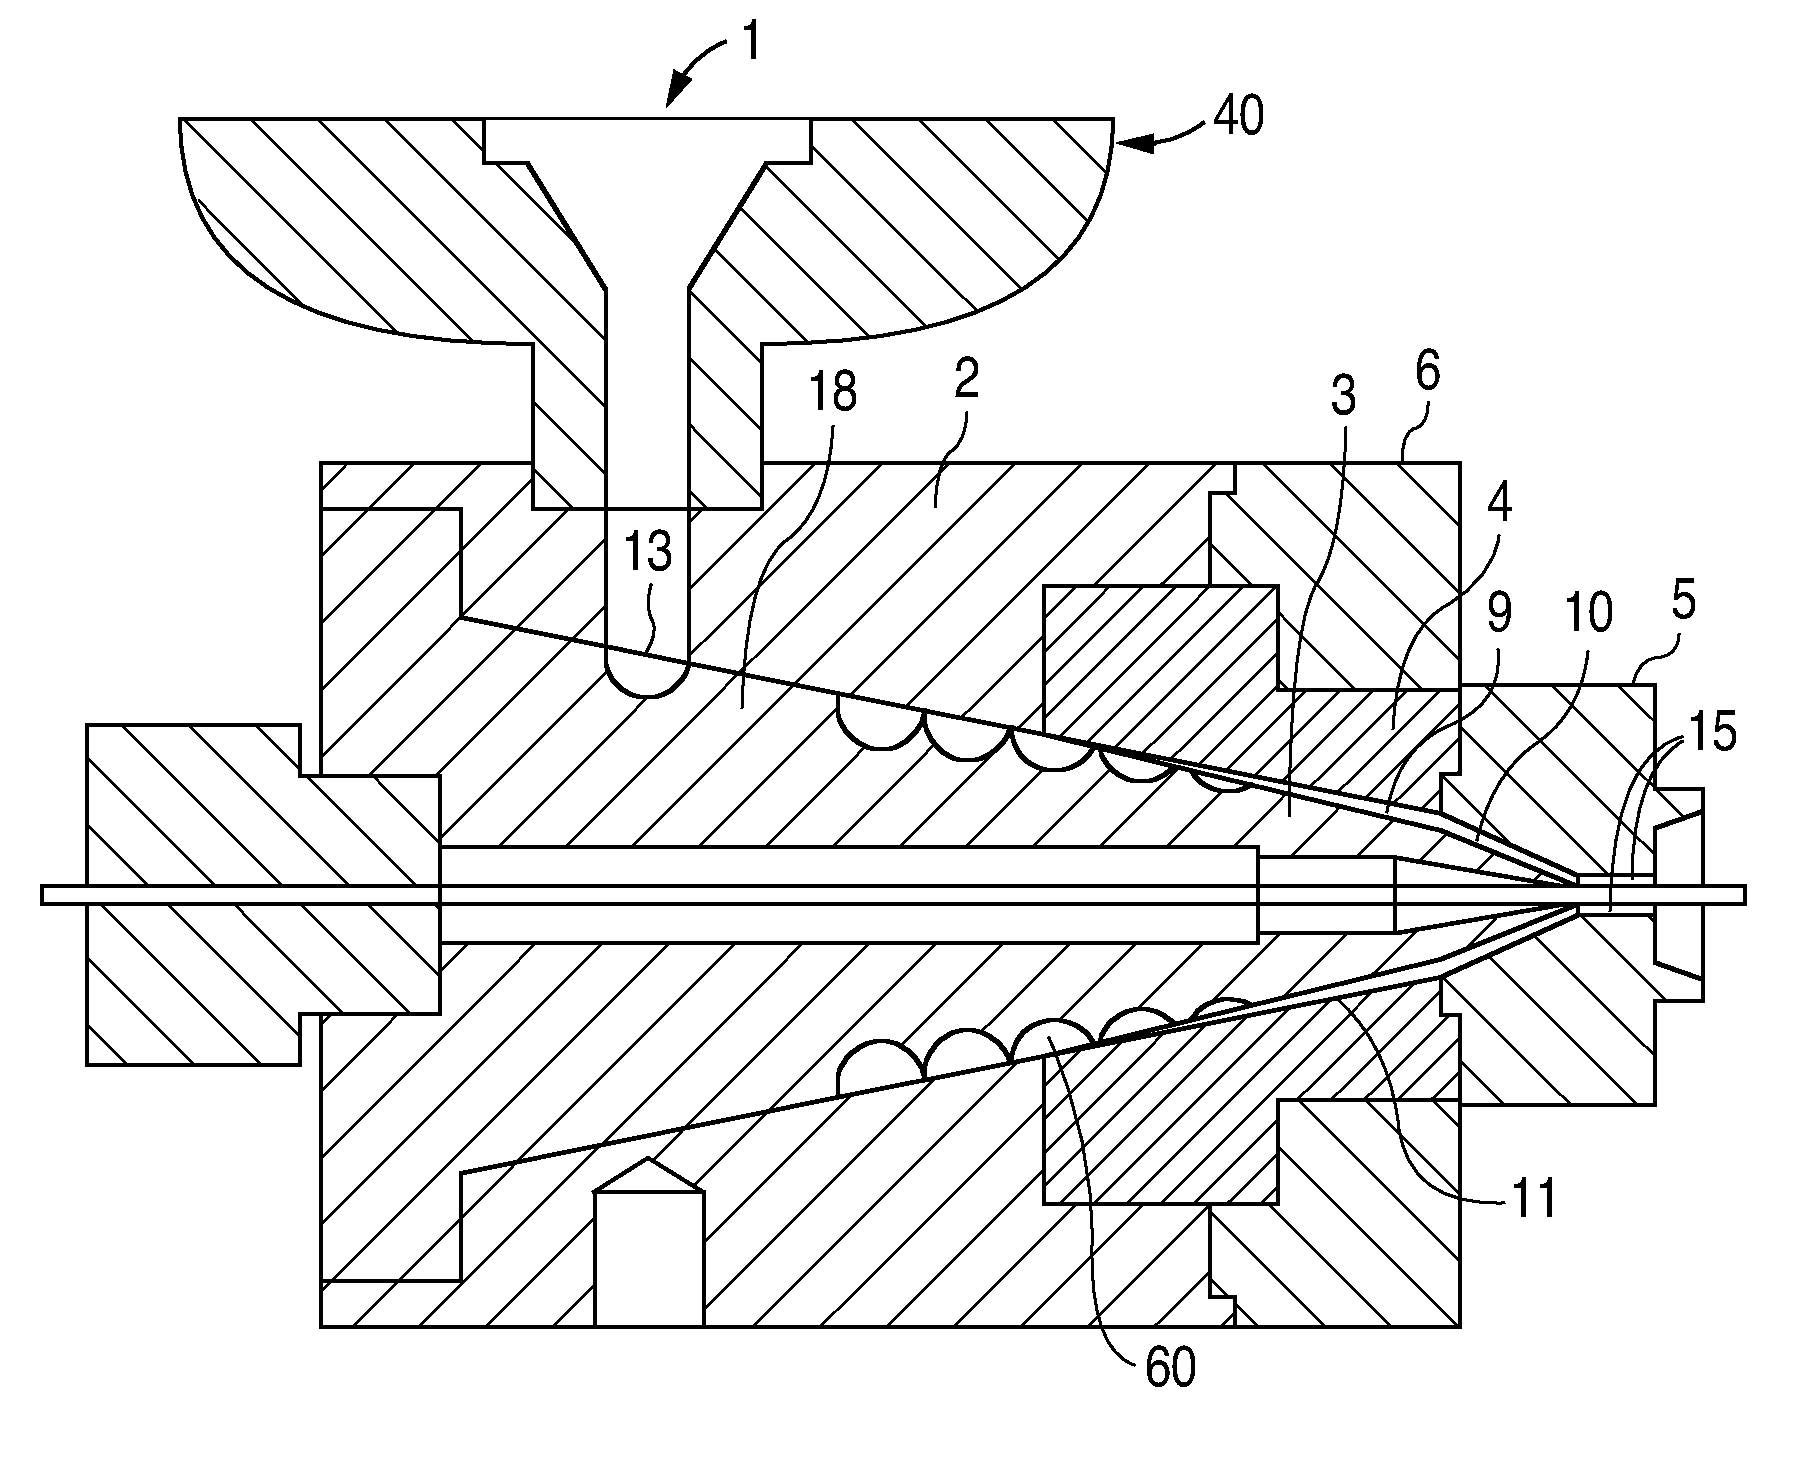 Method of fabricating a low crystallinity poly(L-lactide) tube